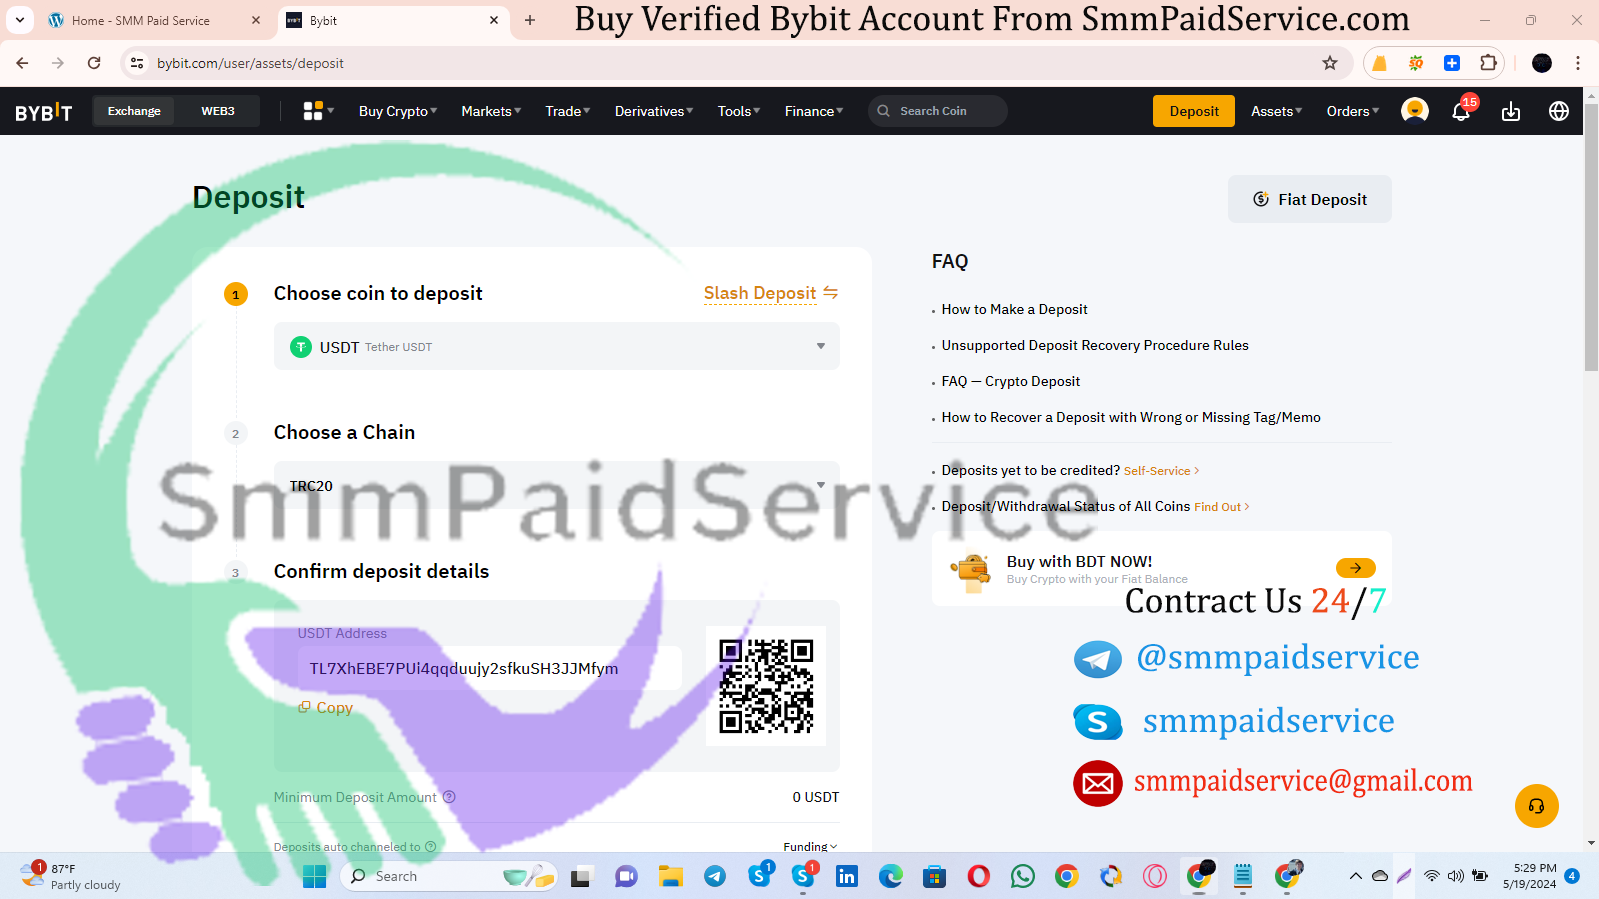 Buy verified Bybit accounts from SmmPaidService.com for instant access, enhanced security, and seamless cryptocurrency trading. Start trading now